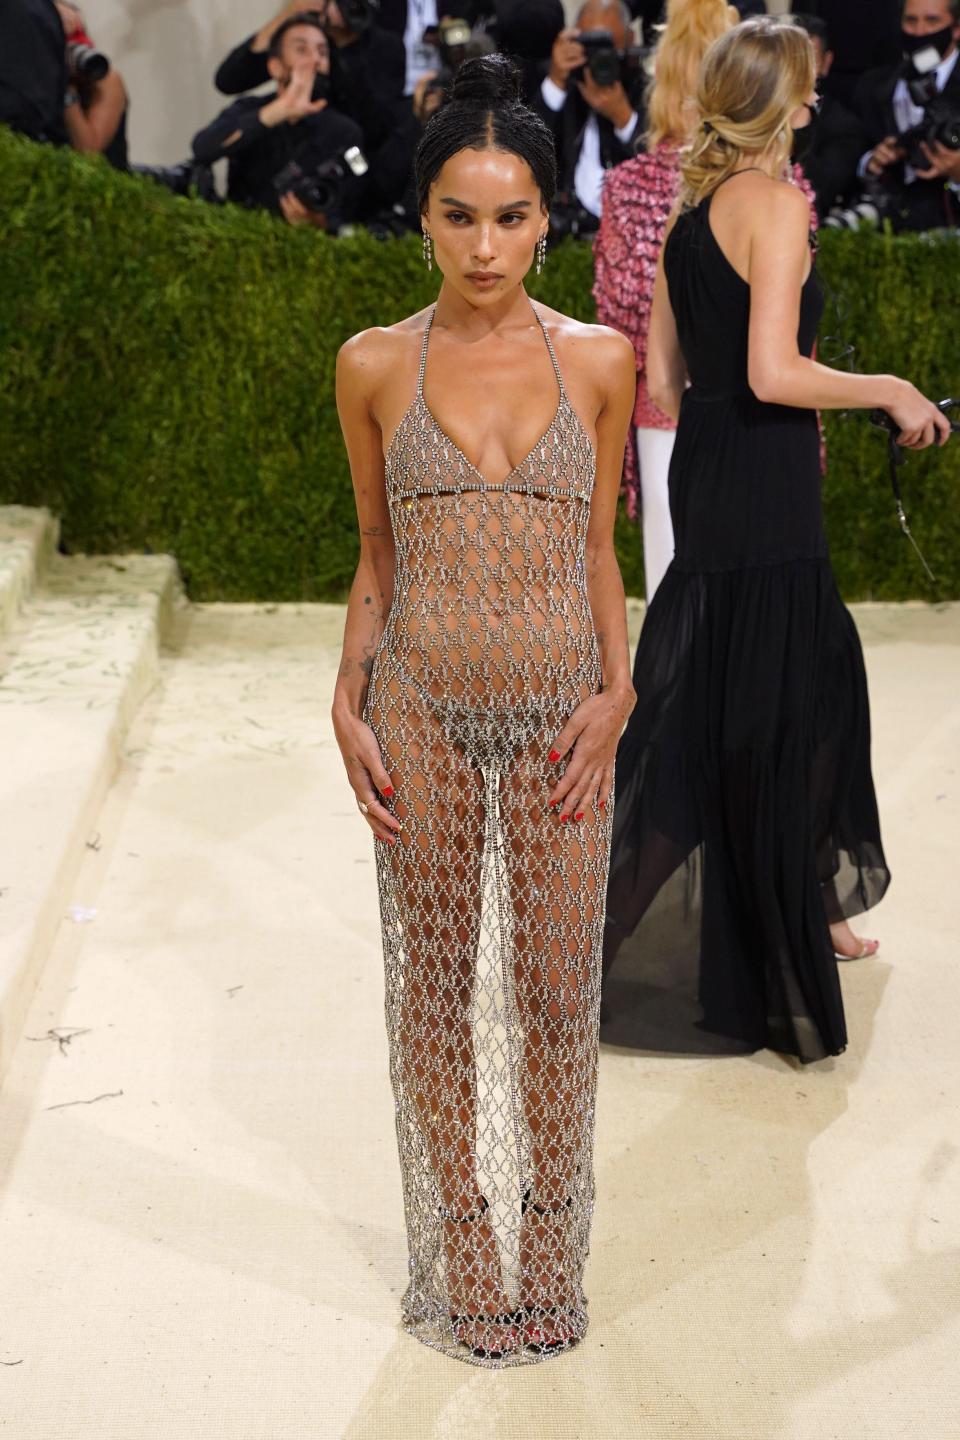 Zoe Kravitz wears a netted, see-through dress at the Met Gala